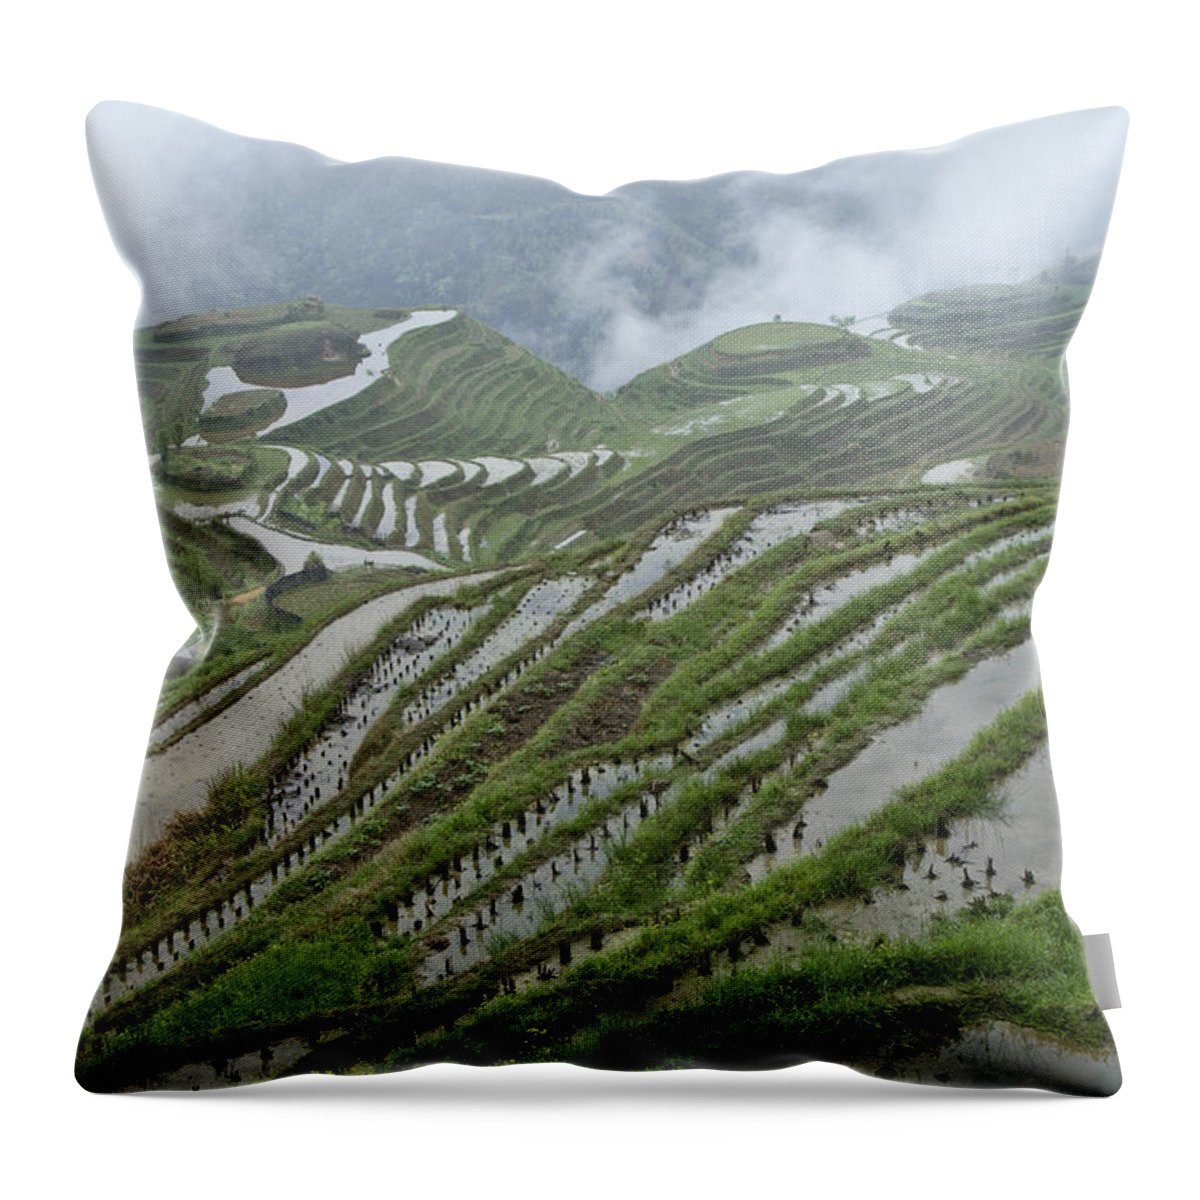 Asia Throw Pillow featuring the photograph Longsheng Rice Terraces #1 by Michele Burgess